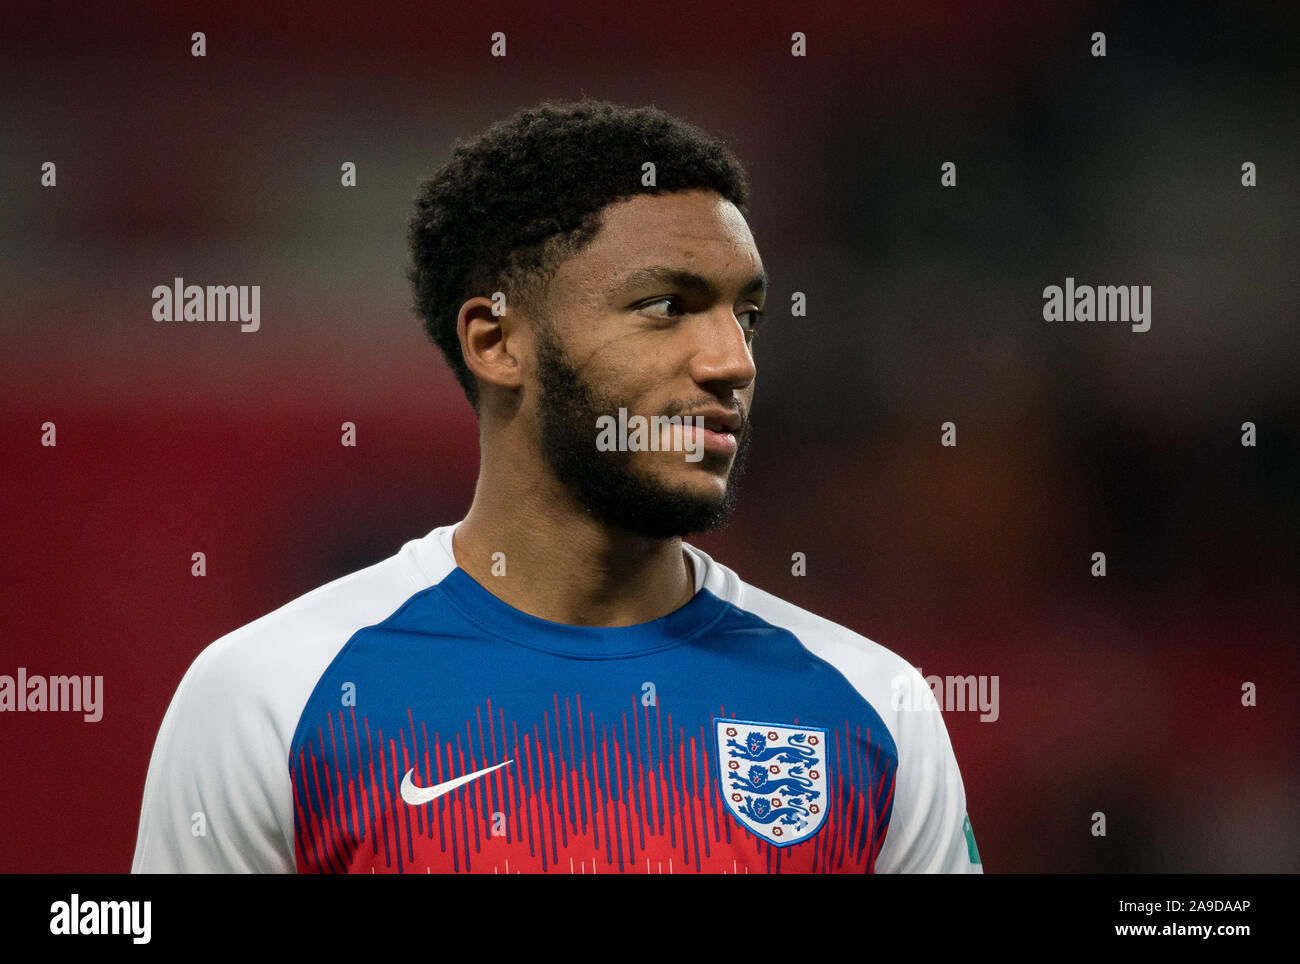 London, UK. 14th Nov, 2019. Joe Gomez (Liverpool) of England pre match during the UEFA Euro 2020 qualifier International match between England and Montenegro at Wembley Stadium, London, England on 14 November 2019. Photo by Andy Rowland. Credit: PRiME Media Images/Alamy Live News Stock Photo